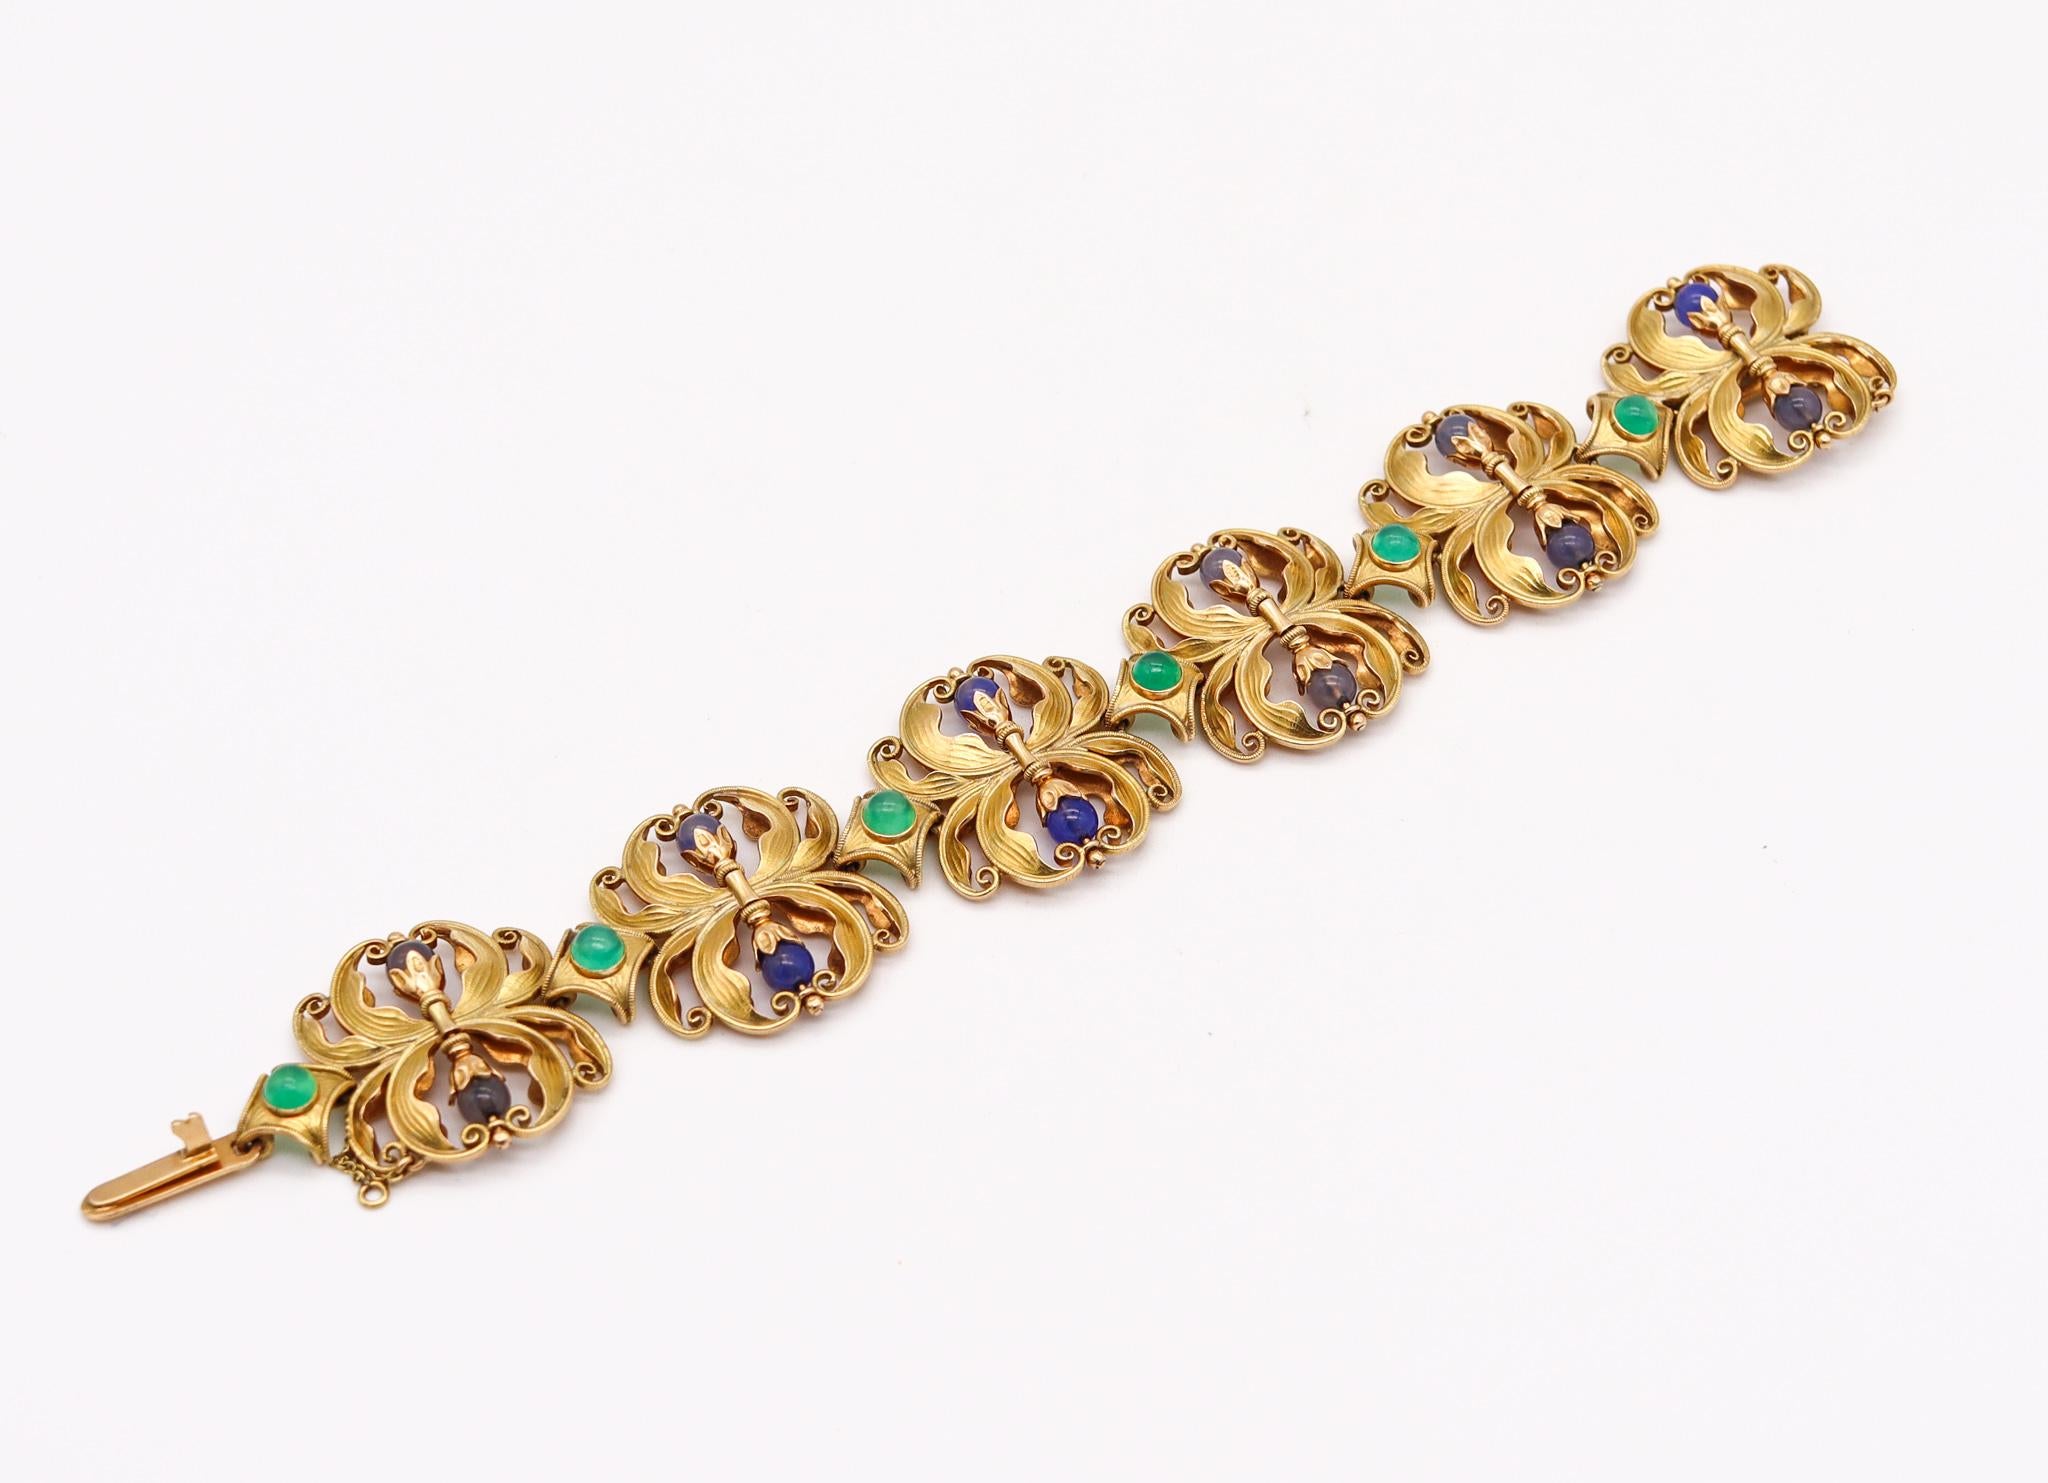 Austrian art nouveau bracelet with gemstones.

Exceptionally beautiful bracelet, created in Austria during the art nouveau period, back in the 1890. This flexible bracelet has been crafted with gorgeous organic patterns made up in chiseled yellow